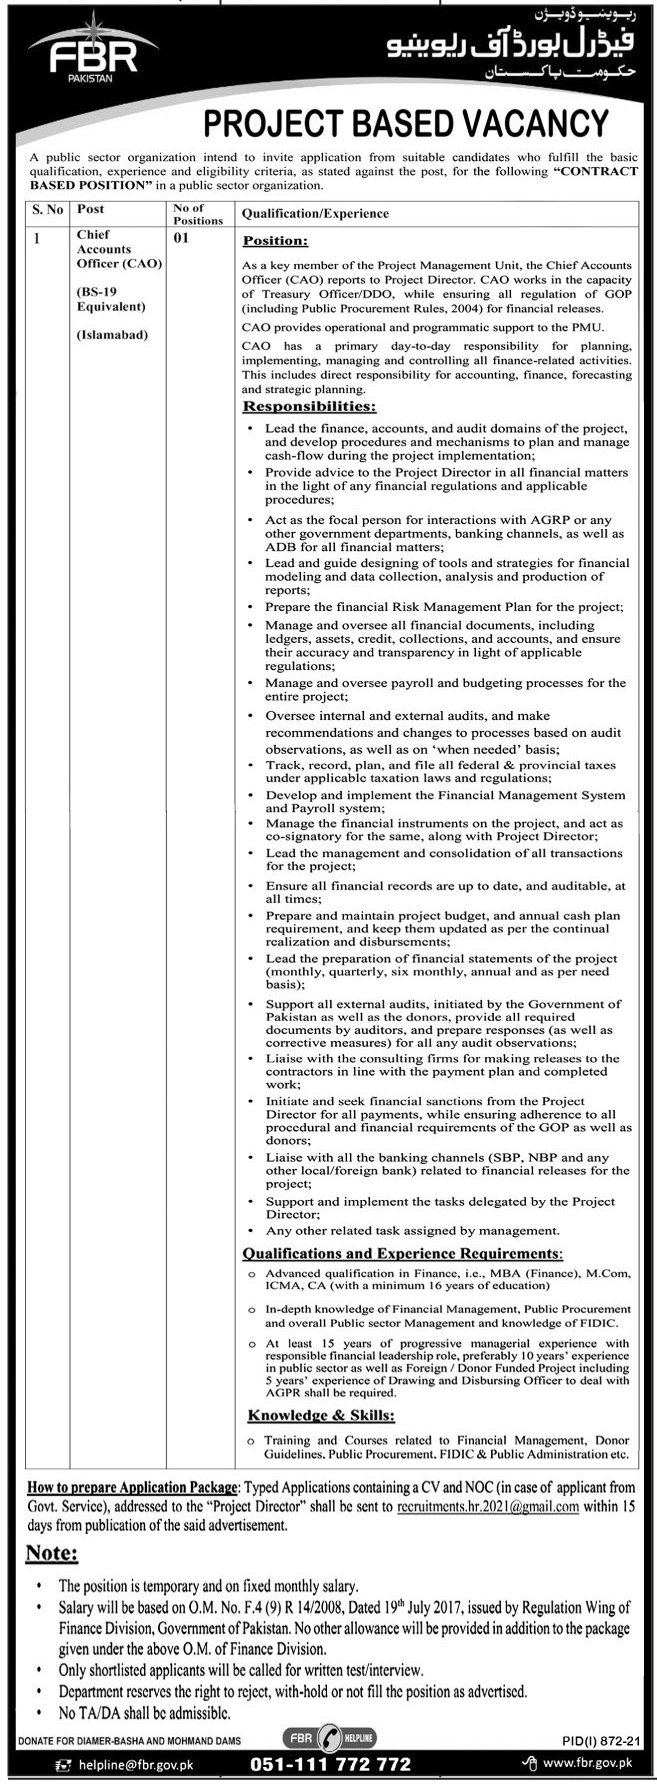 Federal Board of Revenue FBR Job 2021 For Chief Accounts Officer